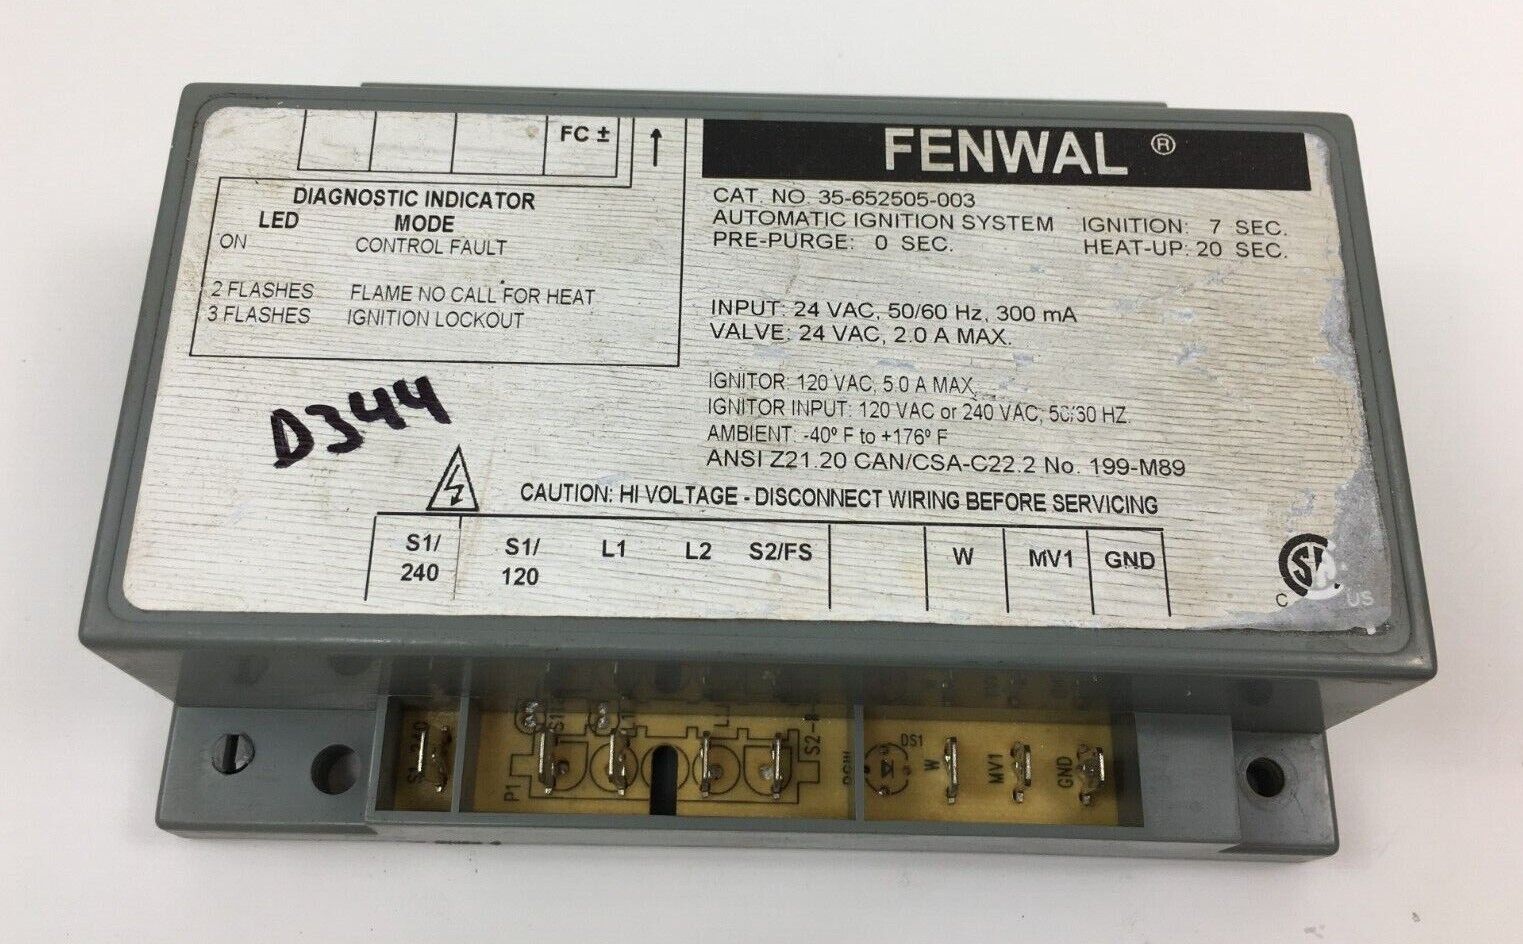 FENWAL 35-652505-003 Automatic Ignition Control Module used #D344